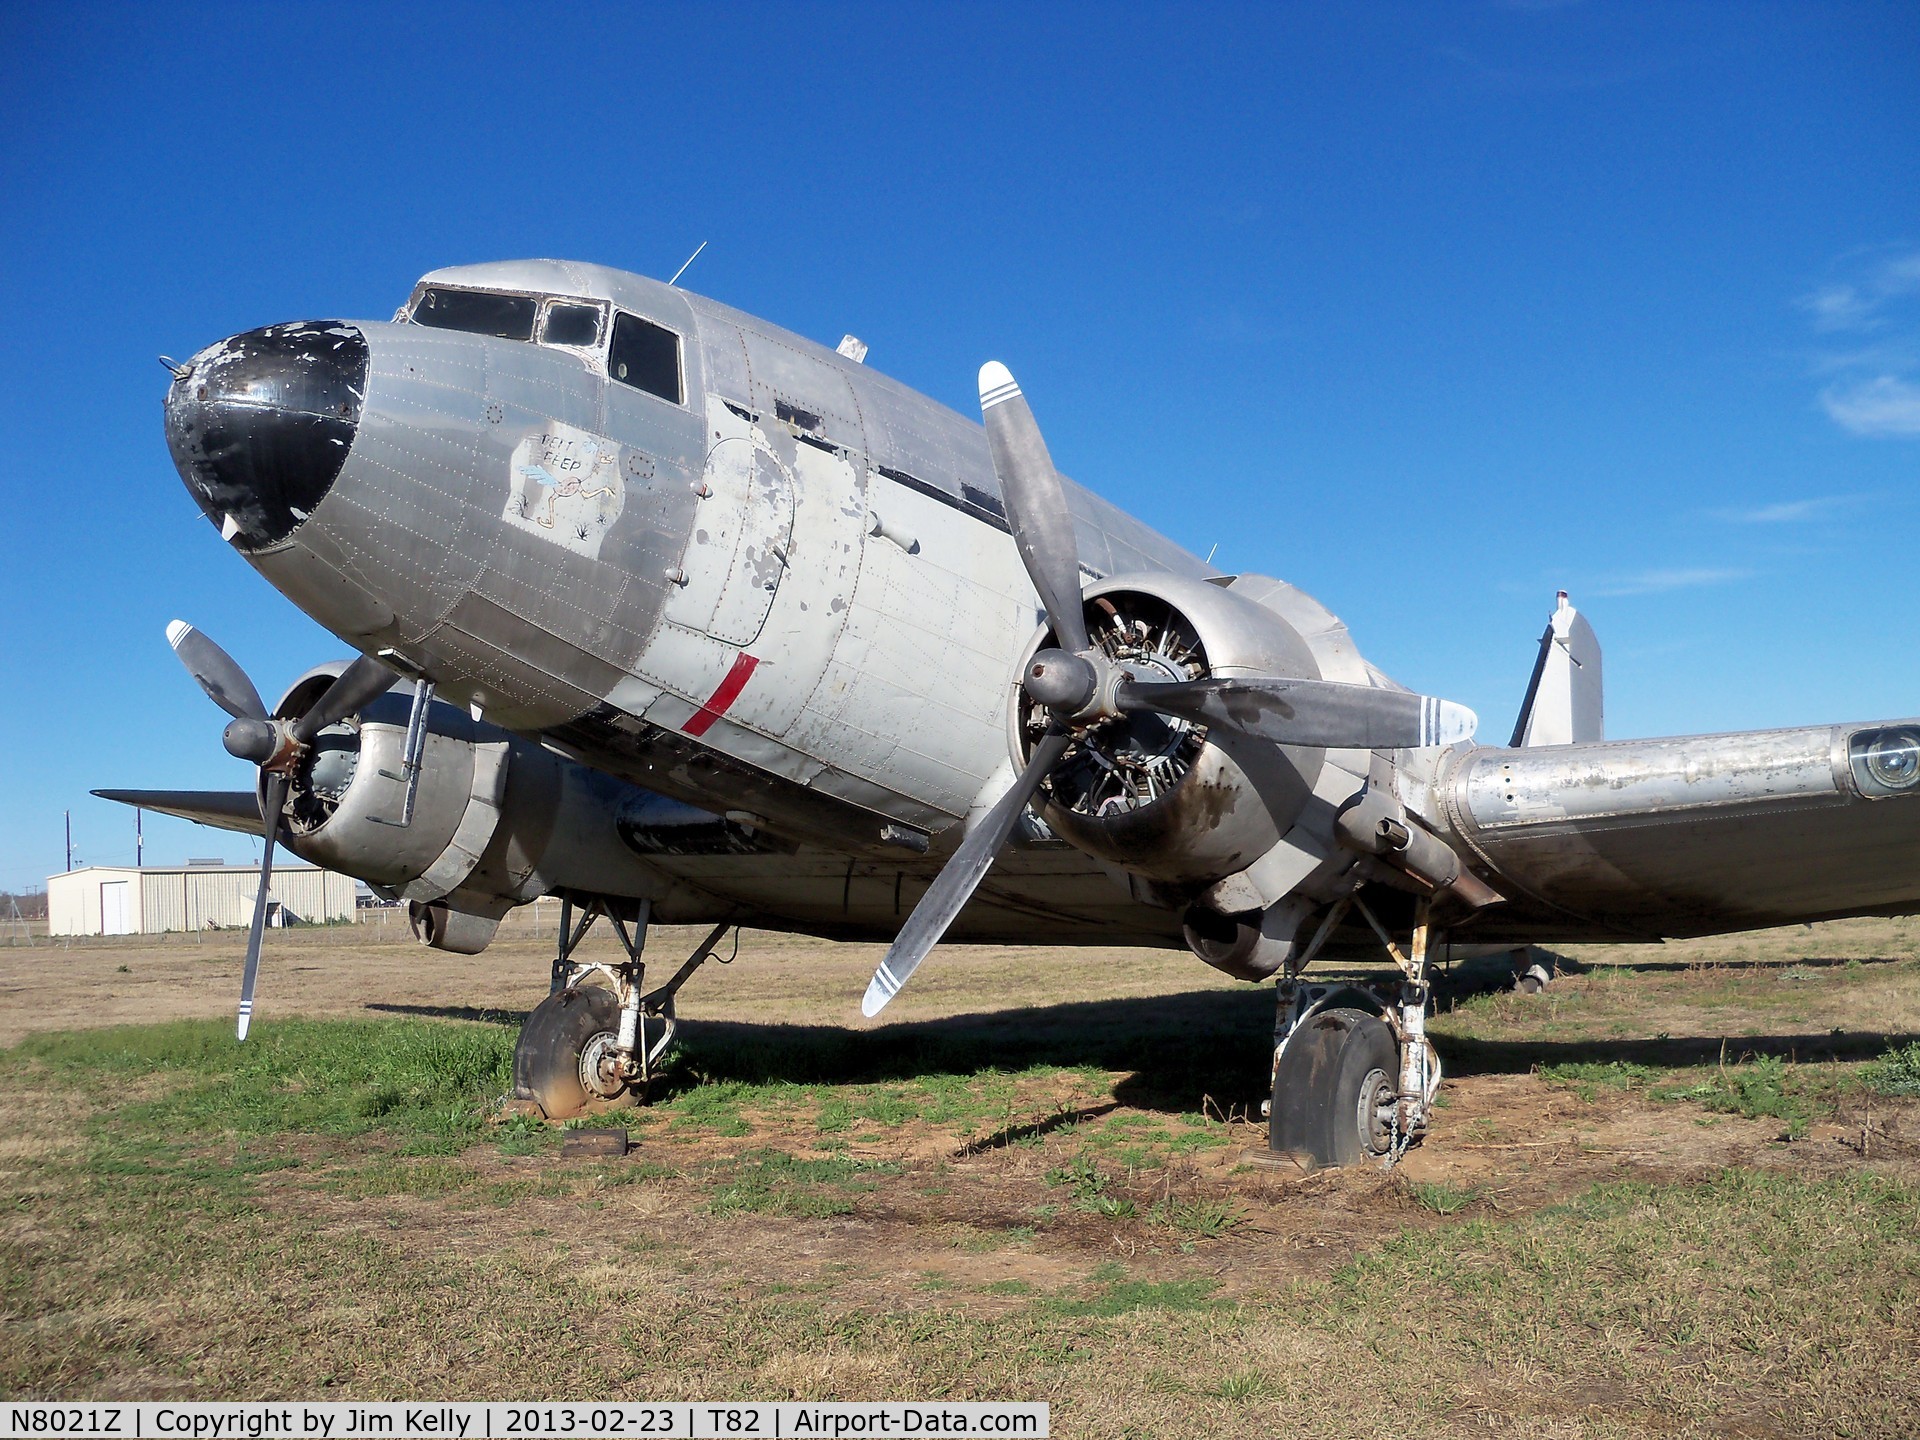 N8021Z, 1944 Douglas DC3C C/N 20444, Photo taken late Feb. 2013 at the Fredericksburg,TX airport, unfortunately it is neglected and deteriorating at fast rate. What a waist of history.